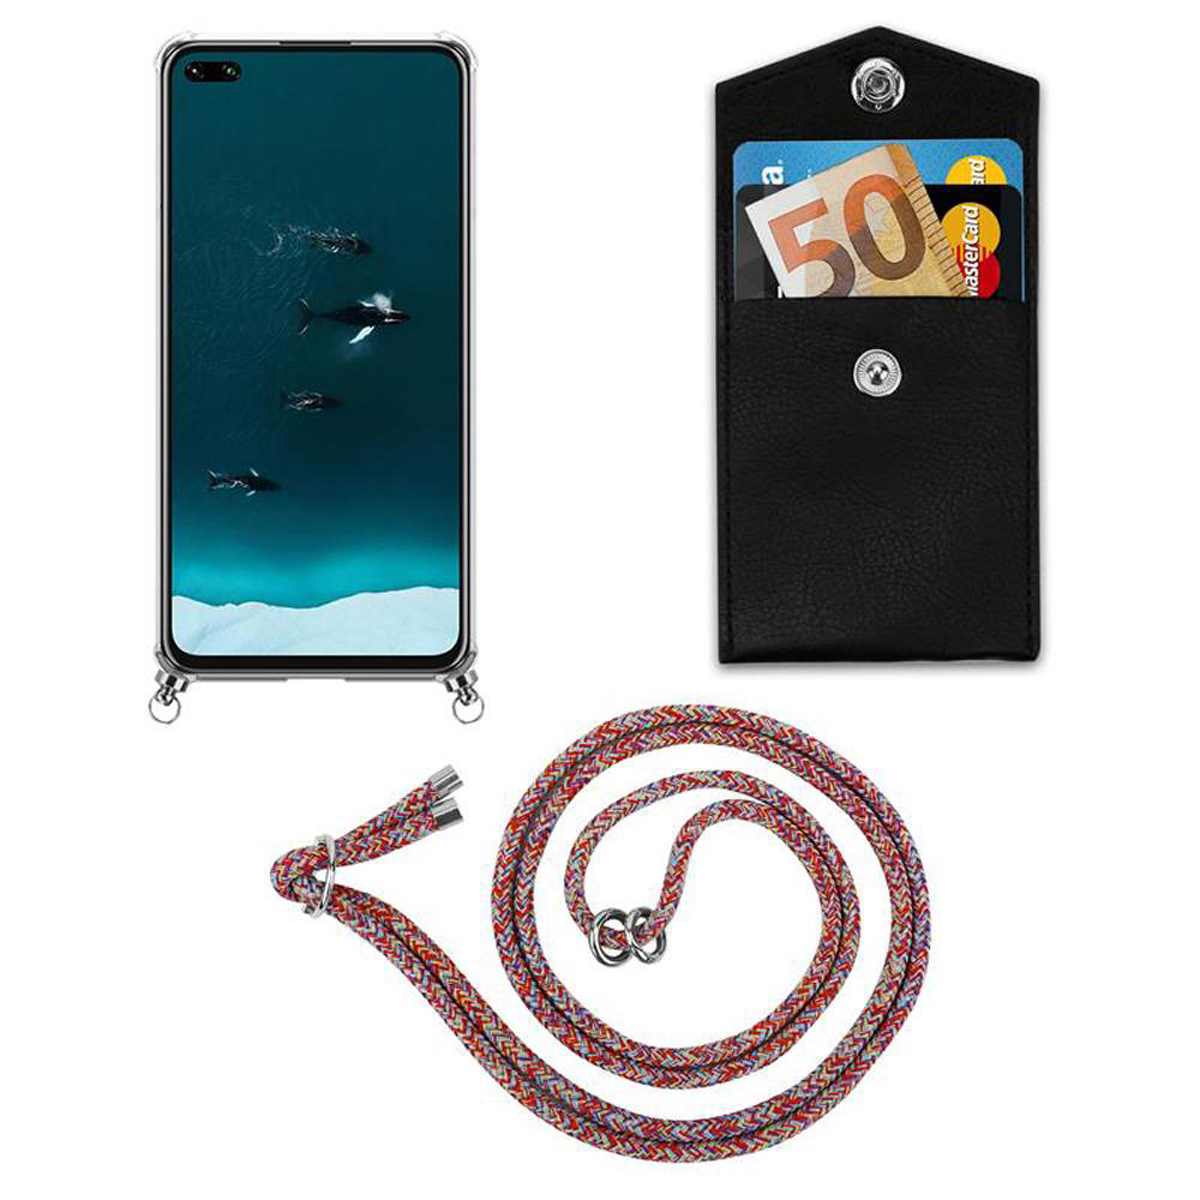 CADORABO Handy Kette mit COLORFUL Backcover, Band Hülle, Kordel PARROT und Silber abnehmbarer Ringen, 30, View Honor